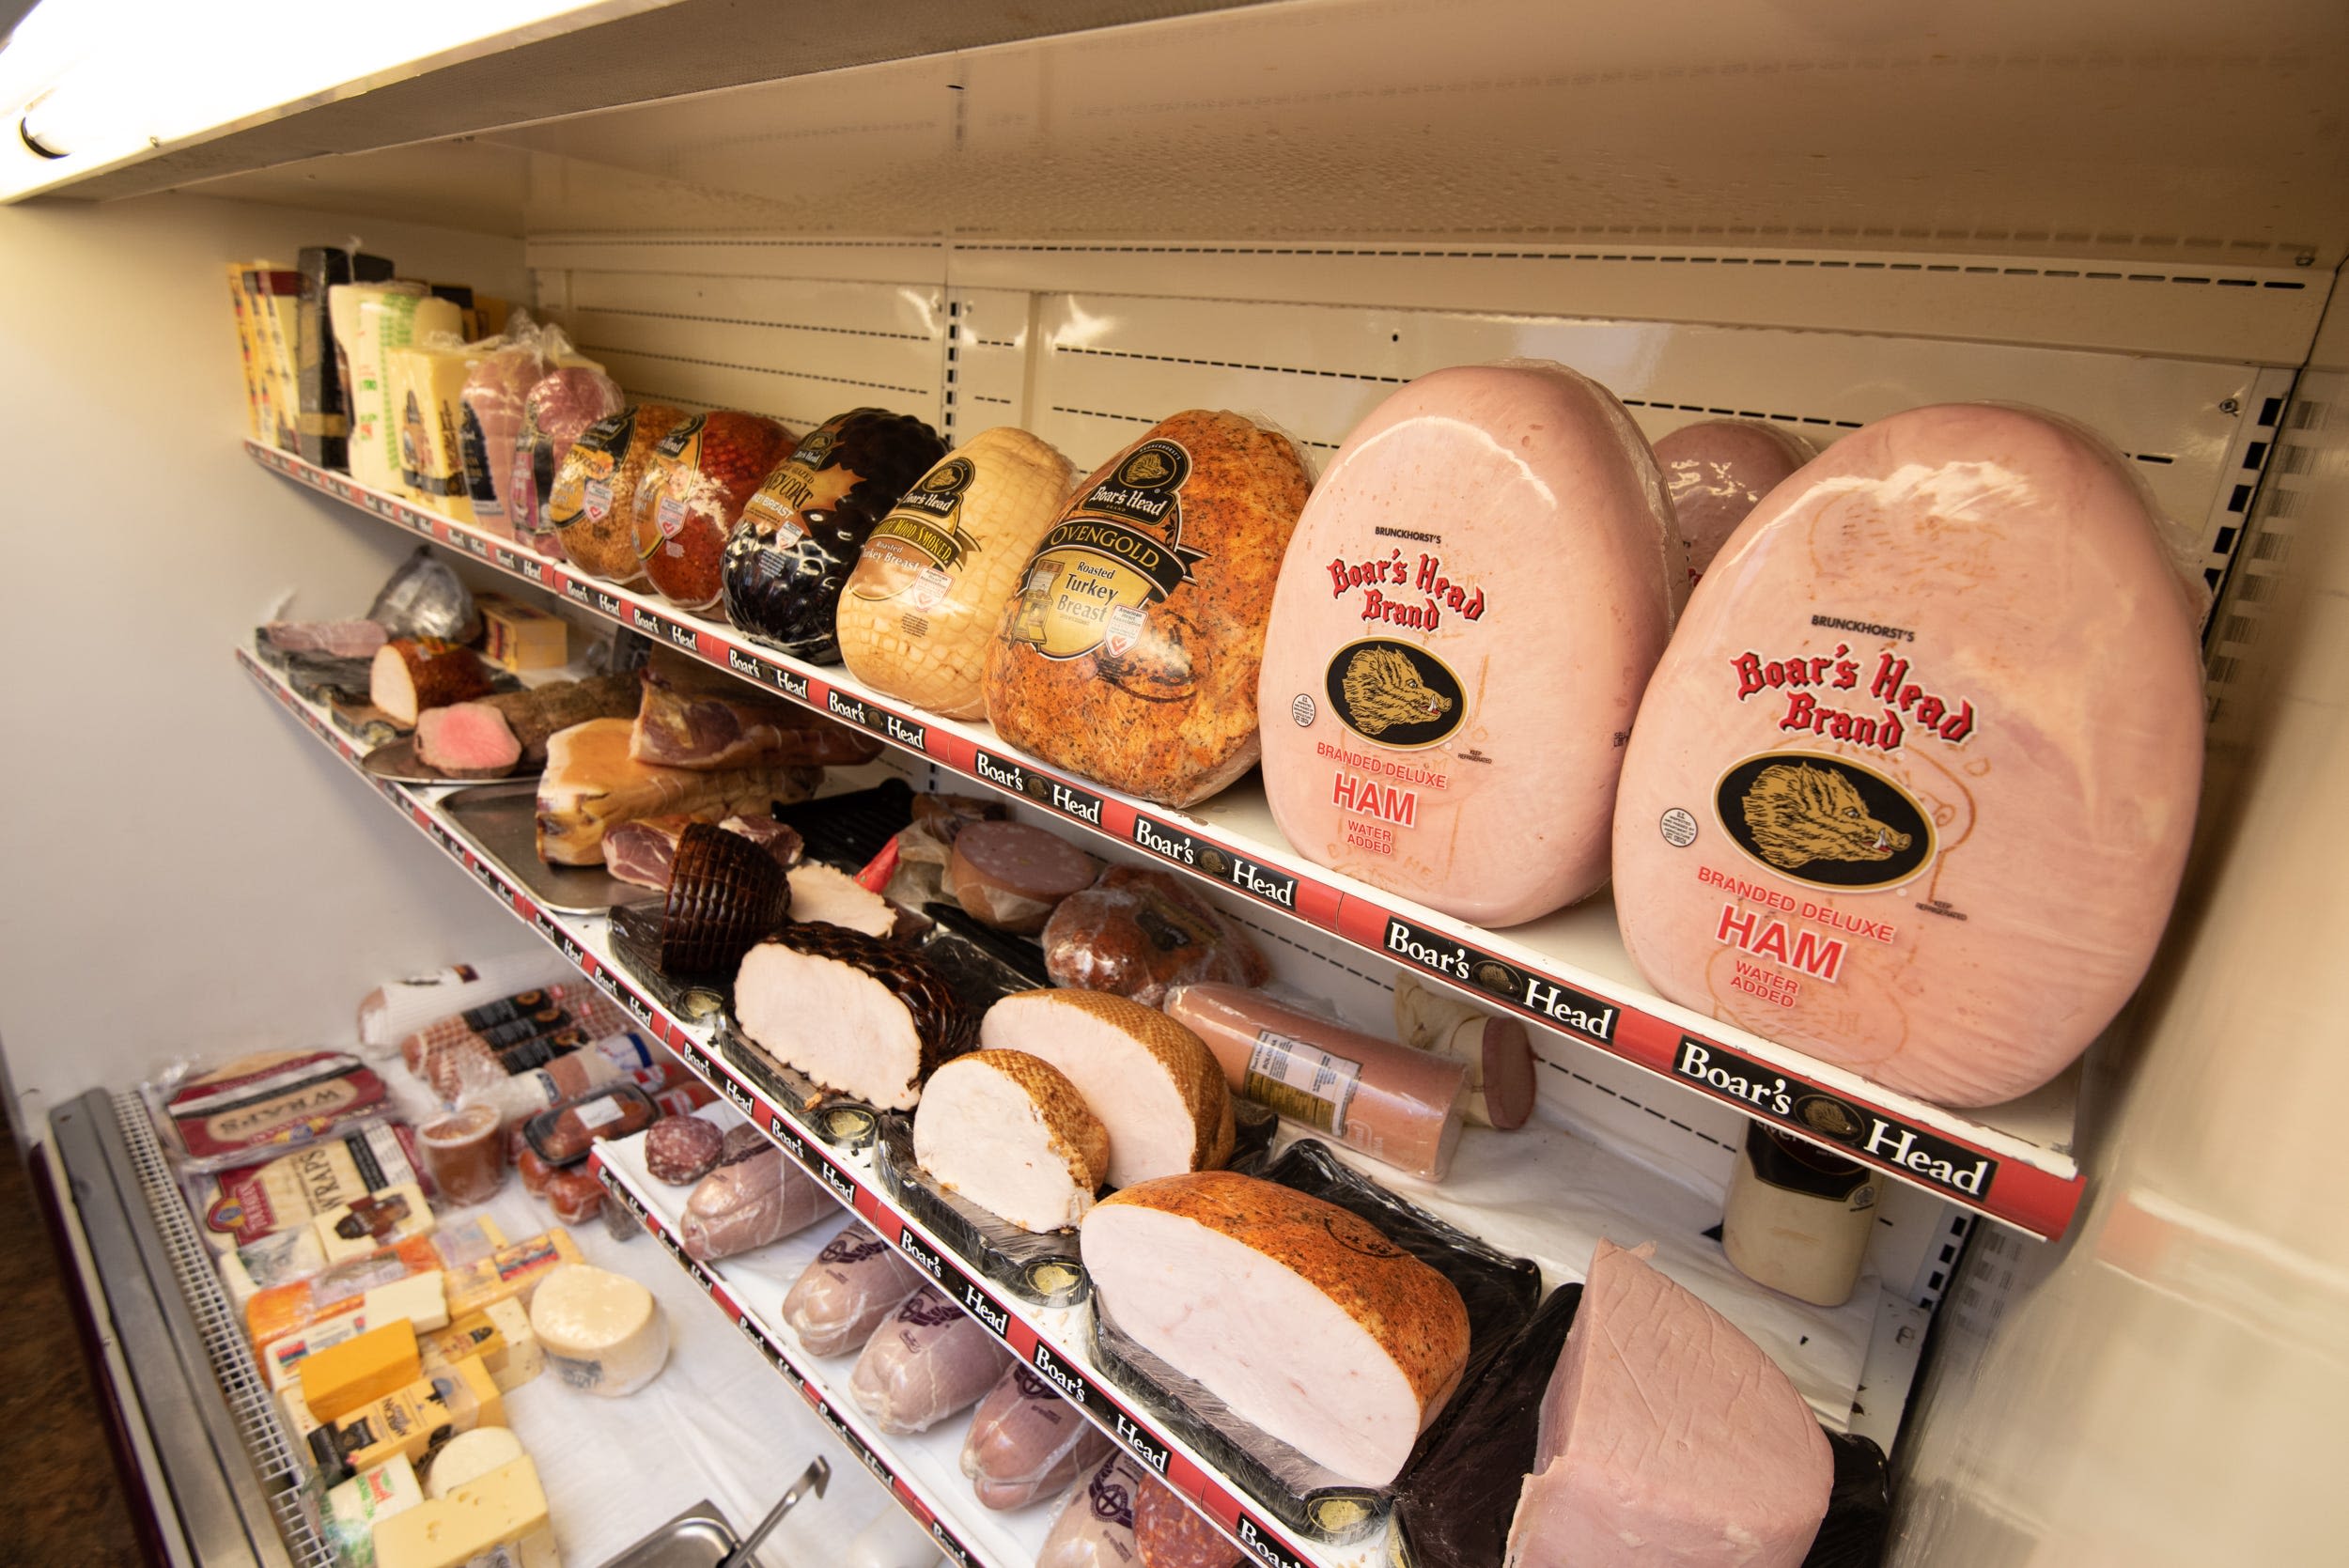 Boar's Head deli meats recalled amid listeria outbreak. What to know in Tennessee